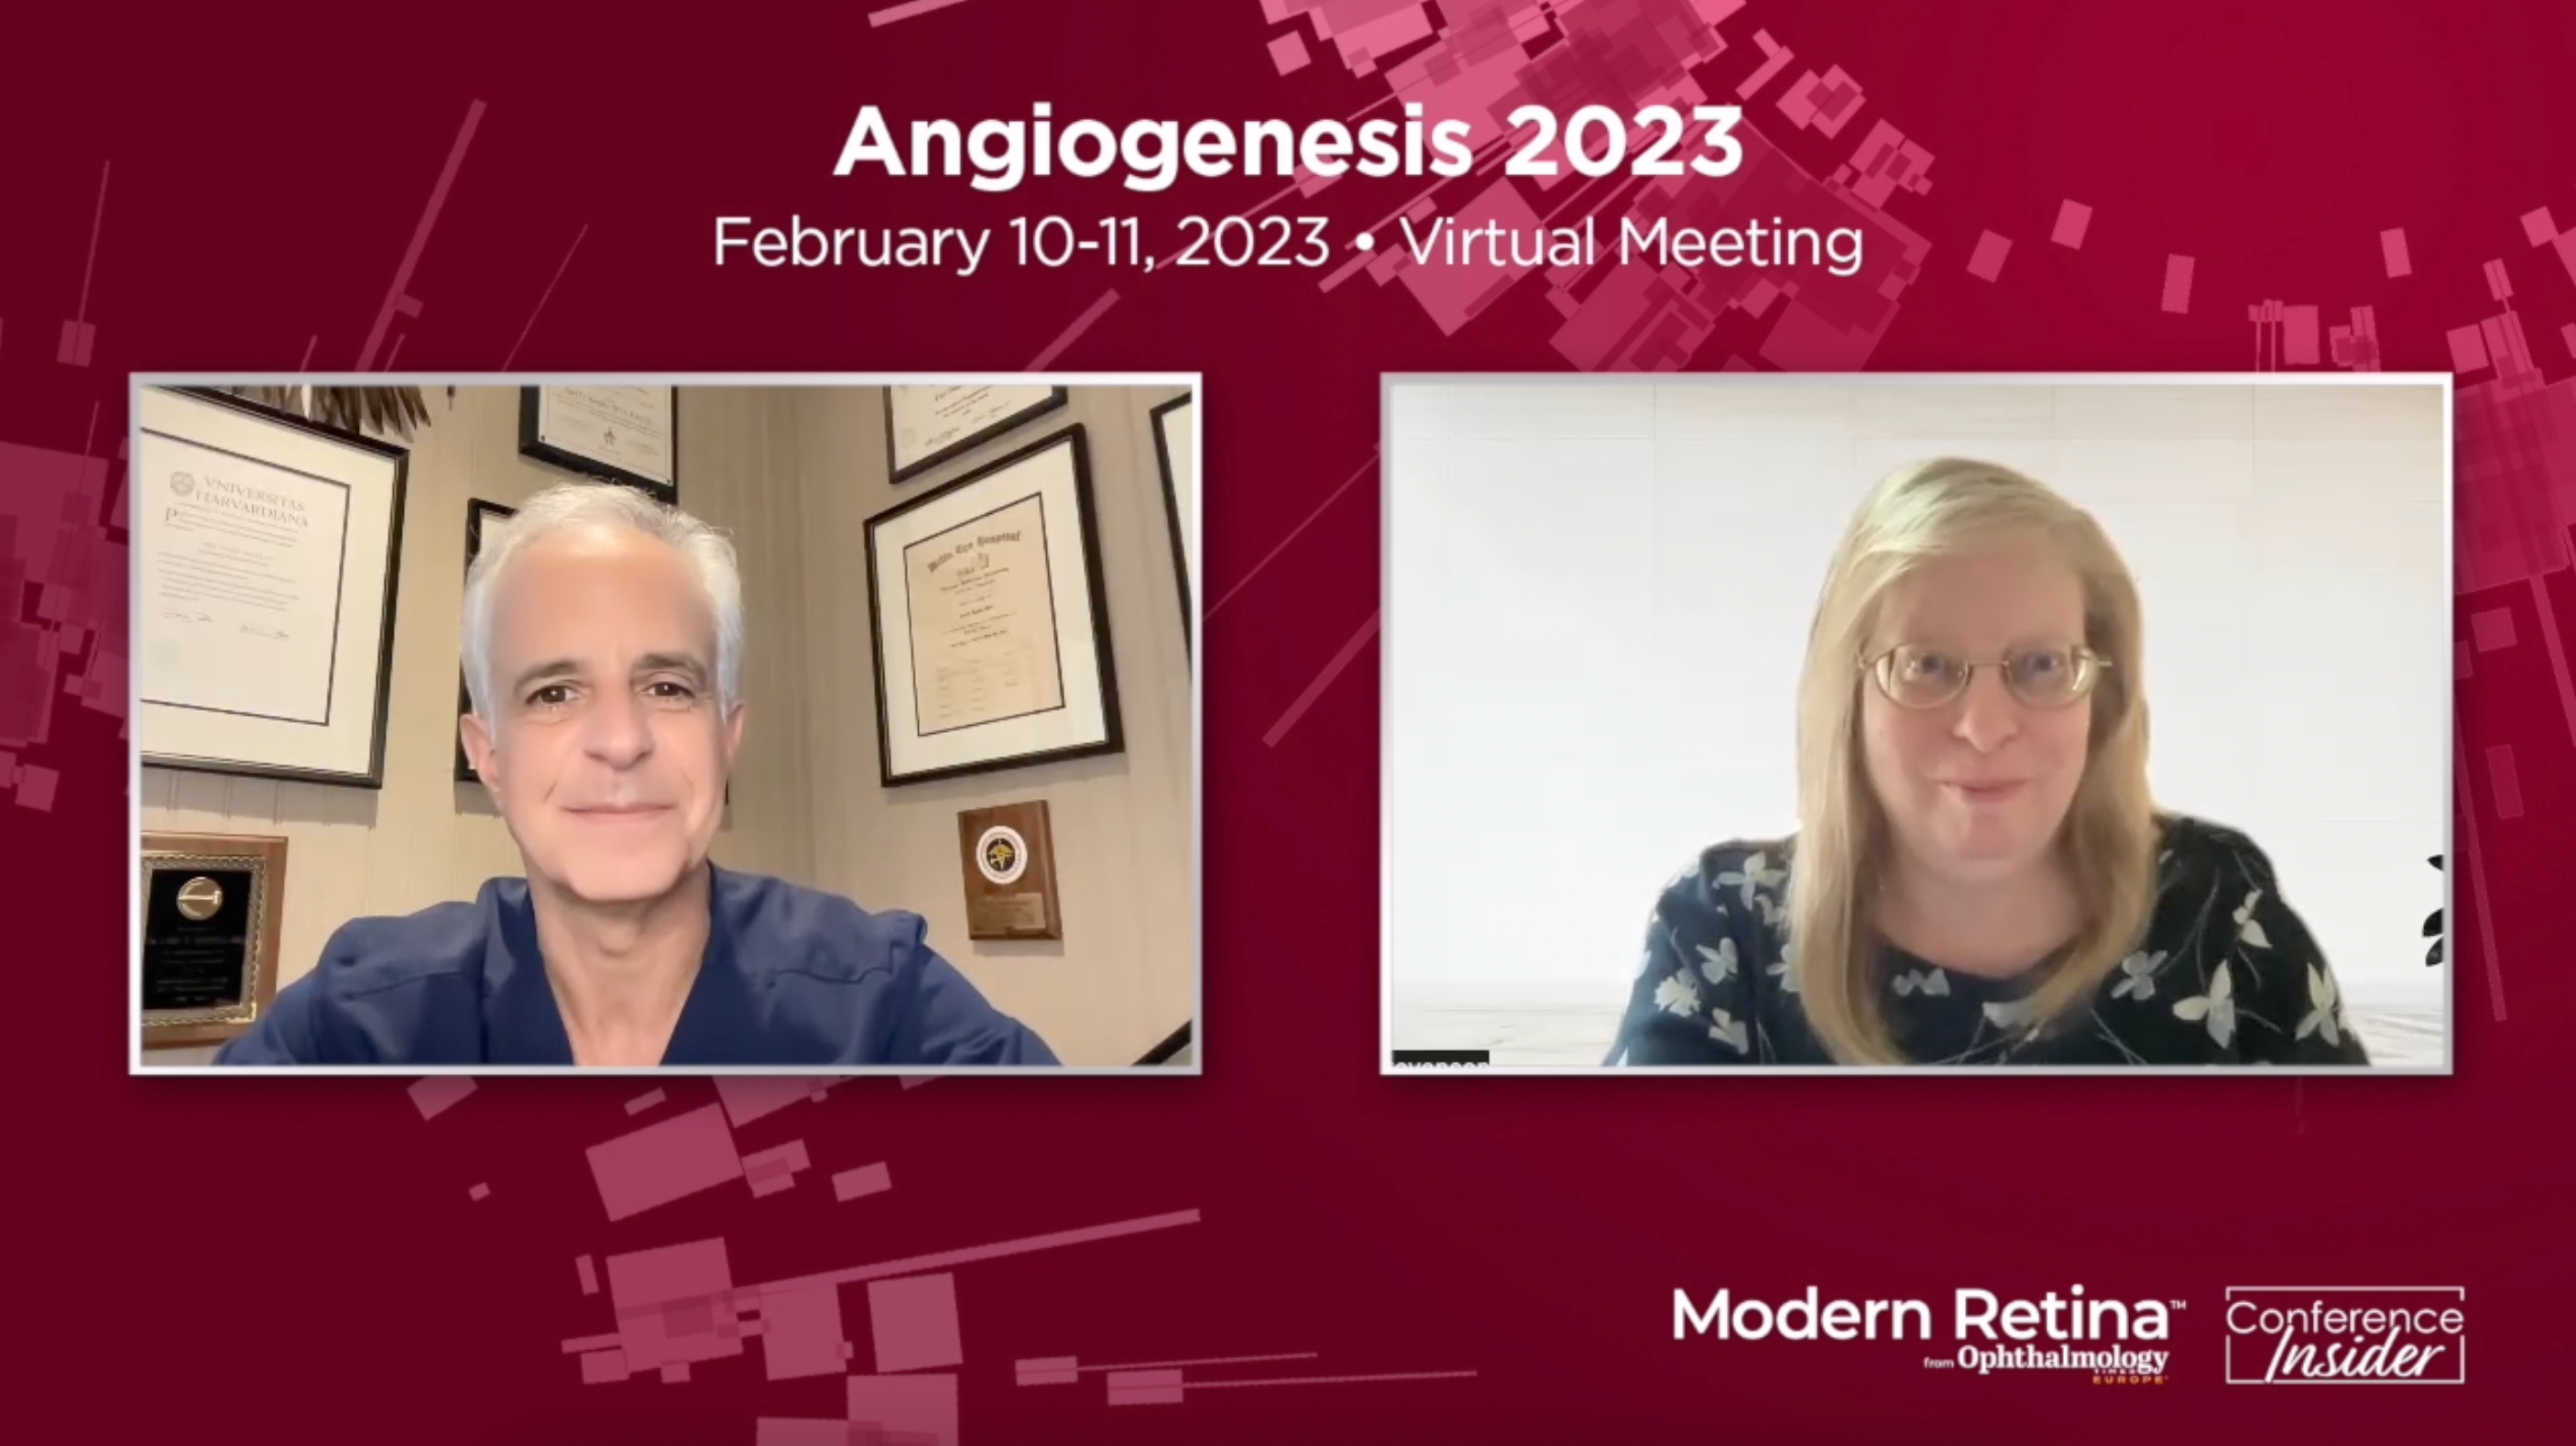 Angiogenesis 2023: What the Talon Phase 3b study results mean for neovascular AMD